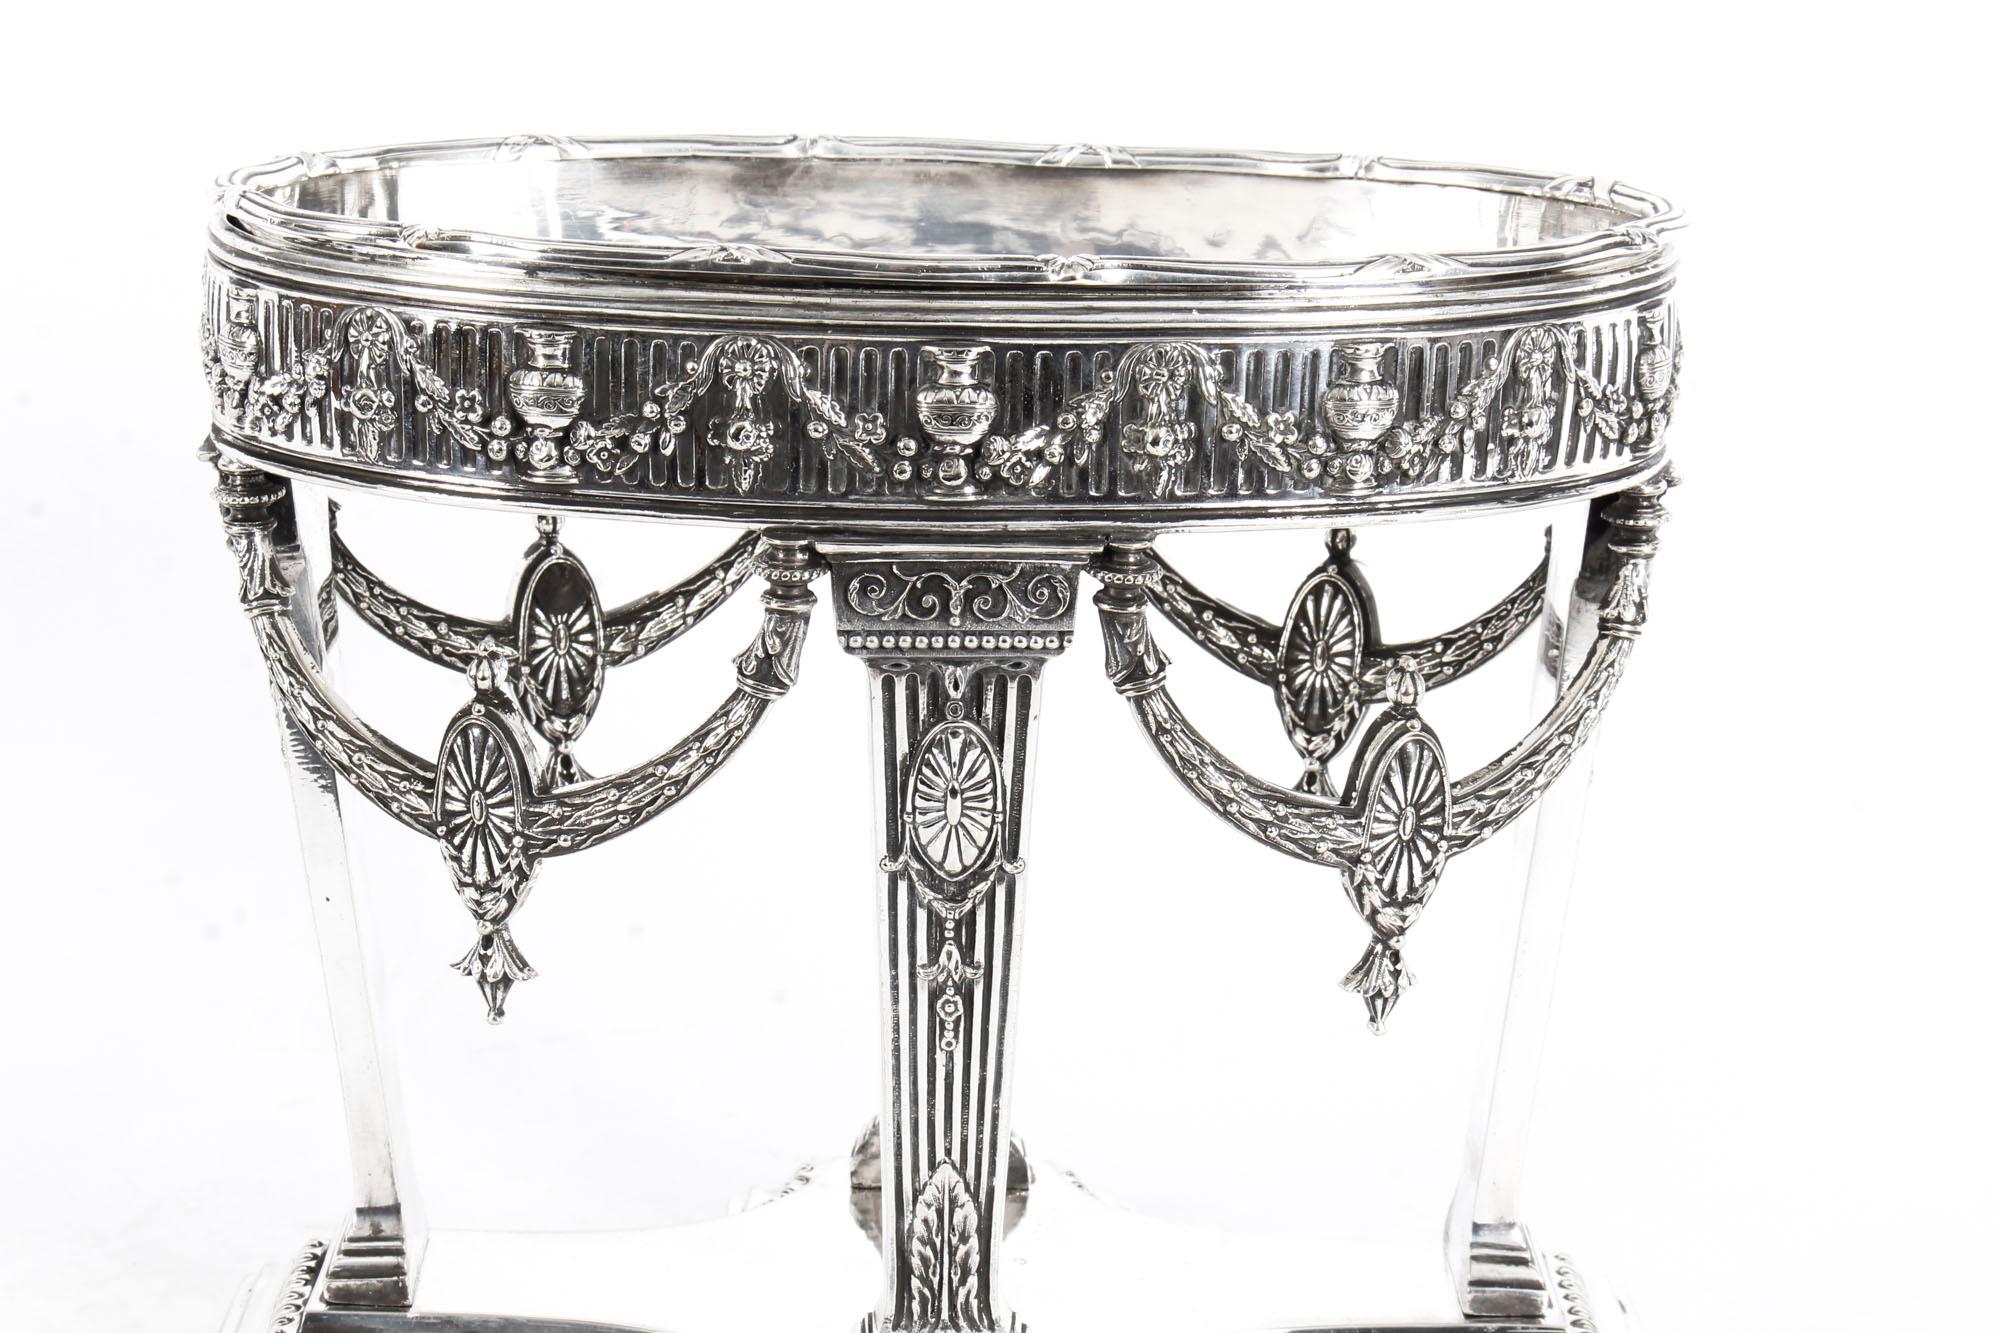 English Antique Victorian Silver Plate Centrepiece by Horace Woodward and Co., 1876